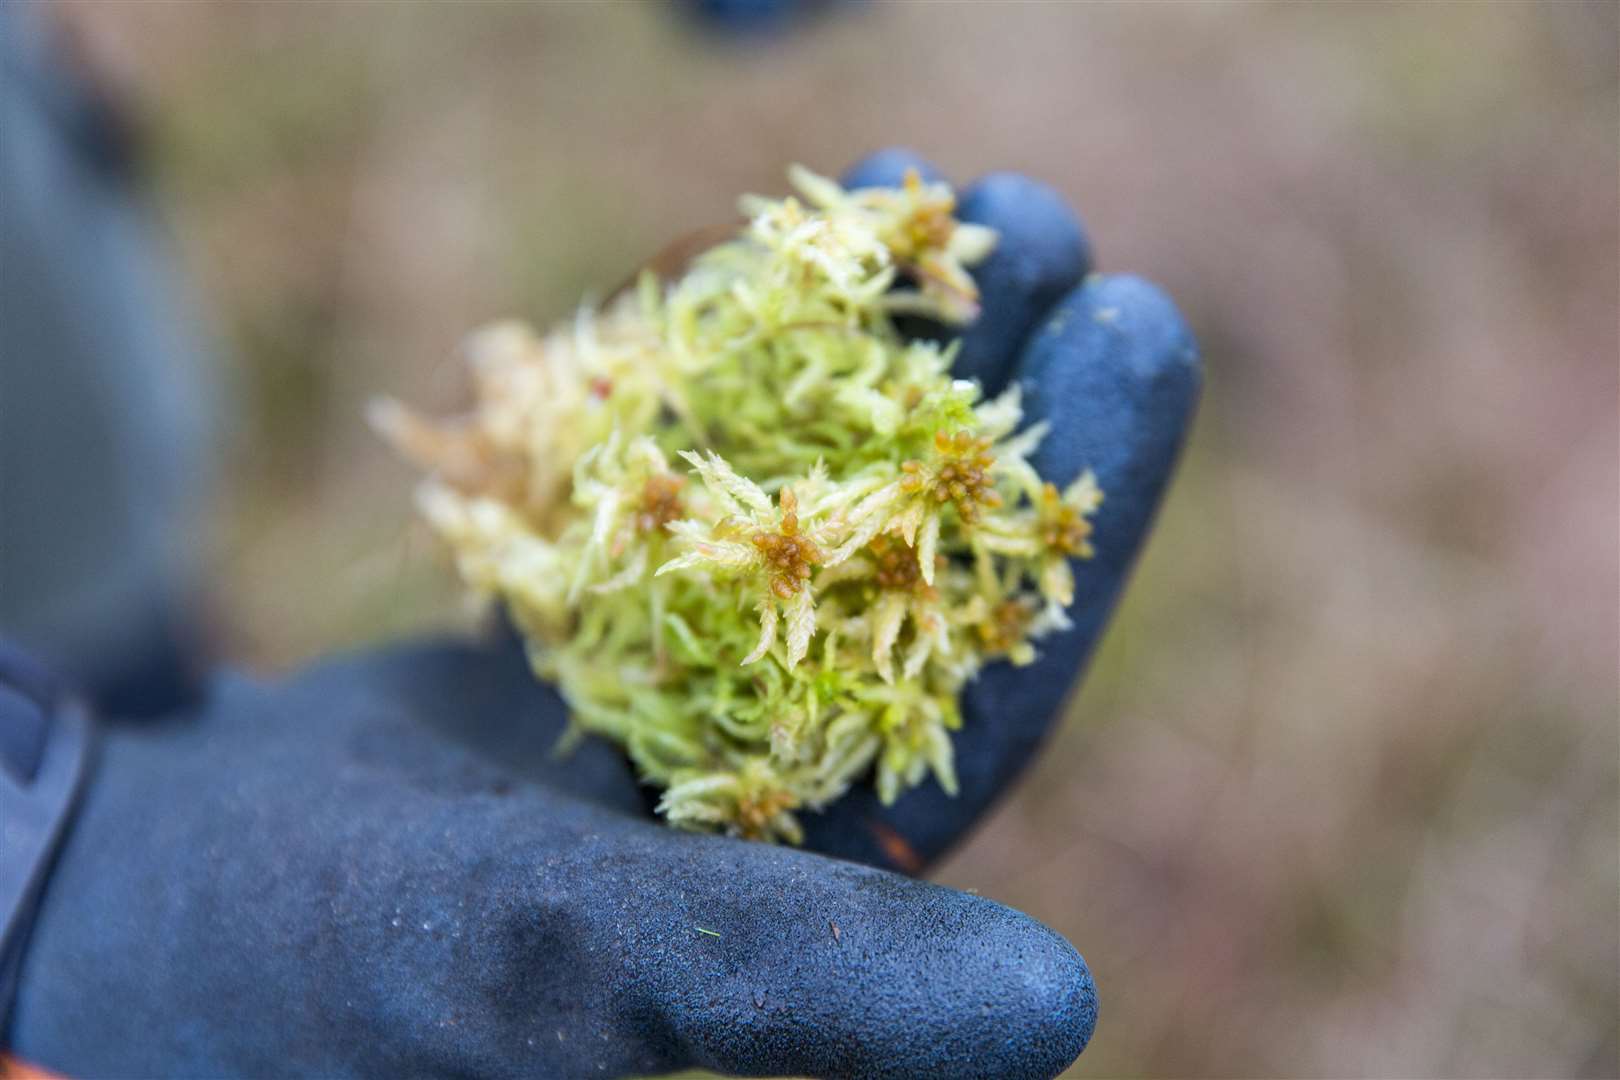 Sphagnum moss plugs before being planted as part of moorland restoration work (Annapurna Mellor/National Trust/PA)